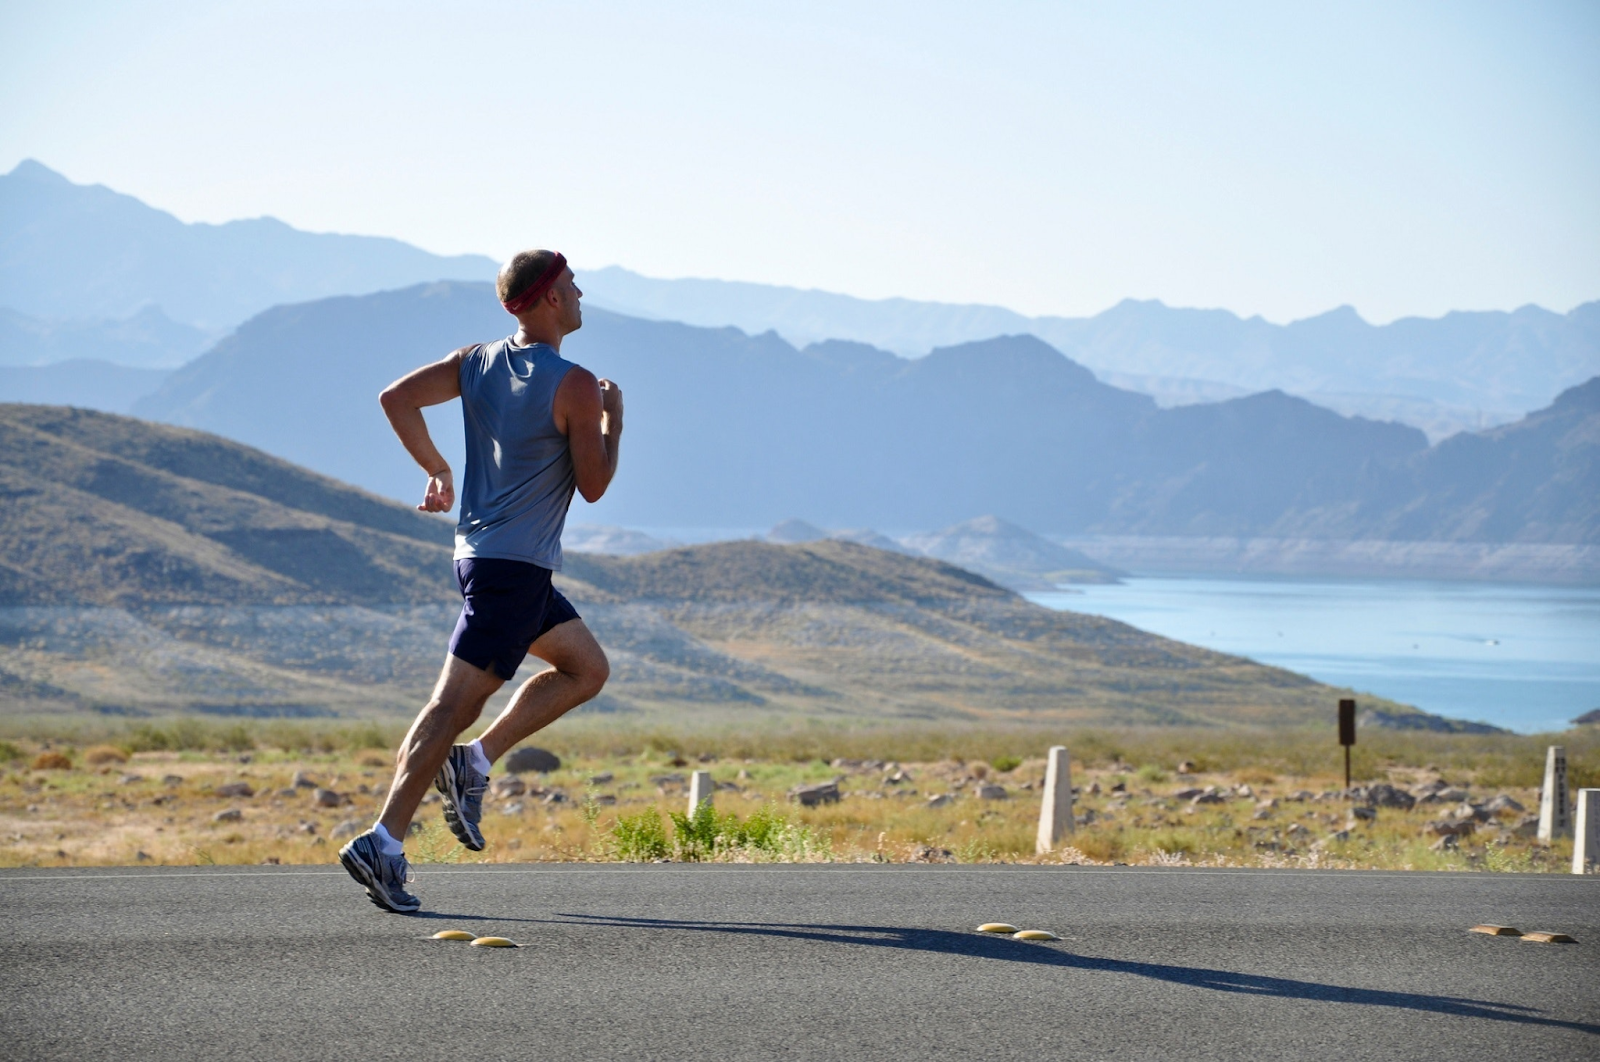 Man Running on Roadside With A Mountains and a Lake in the Background.